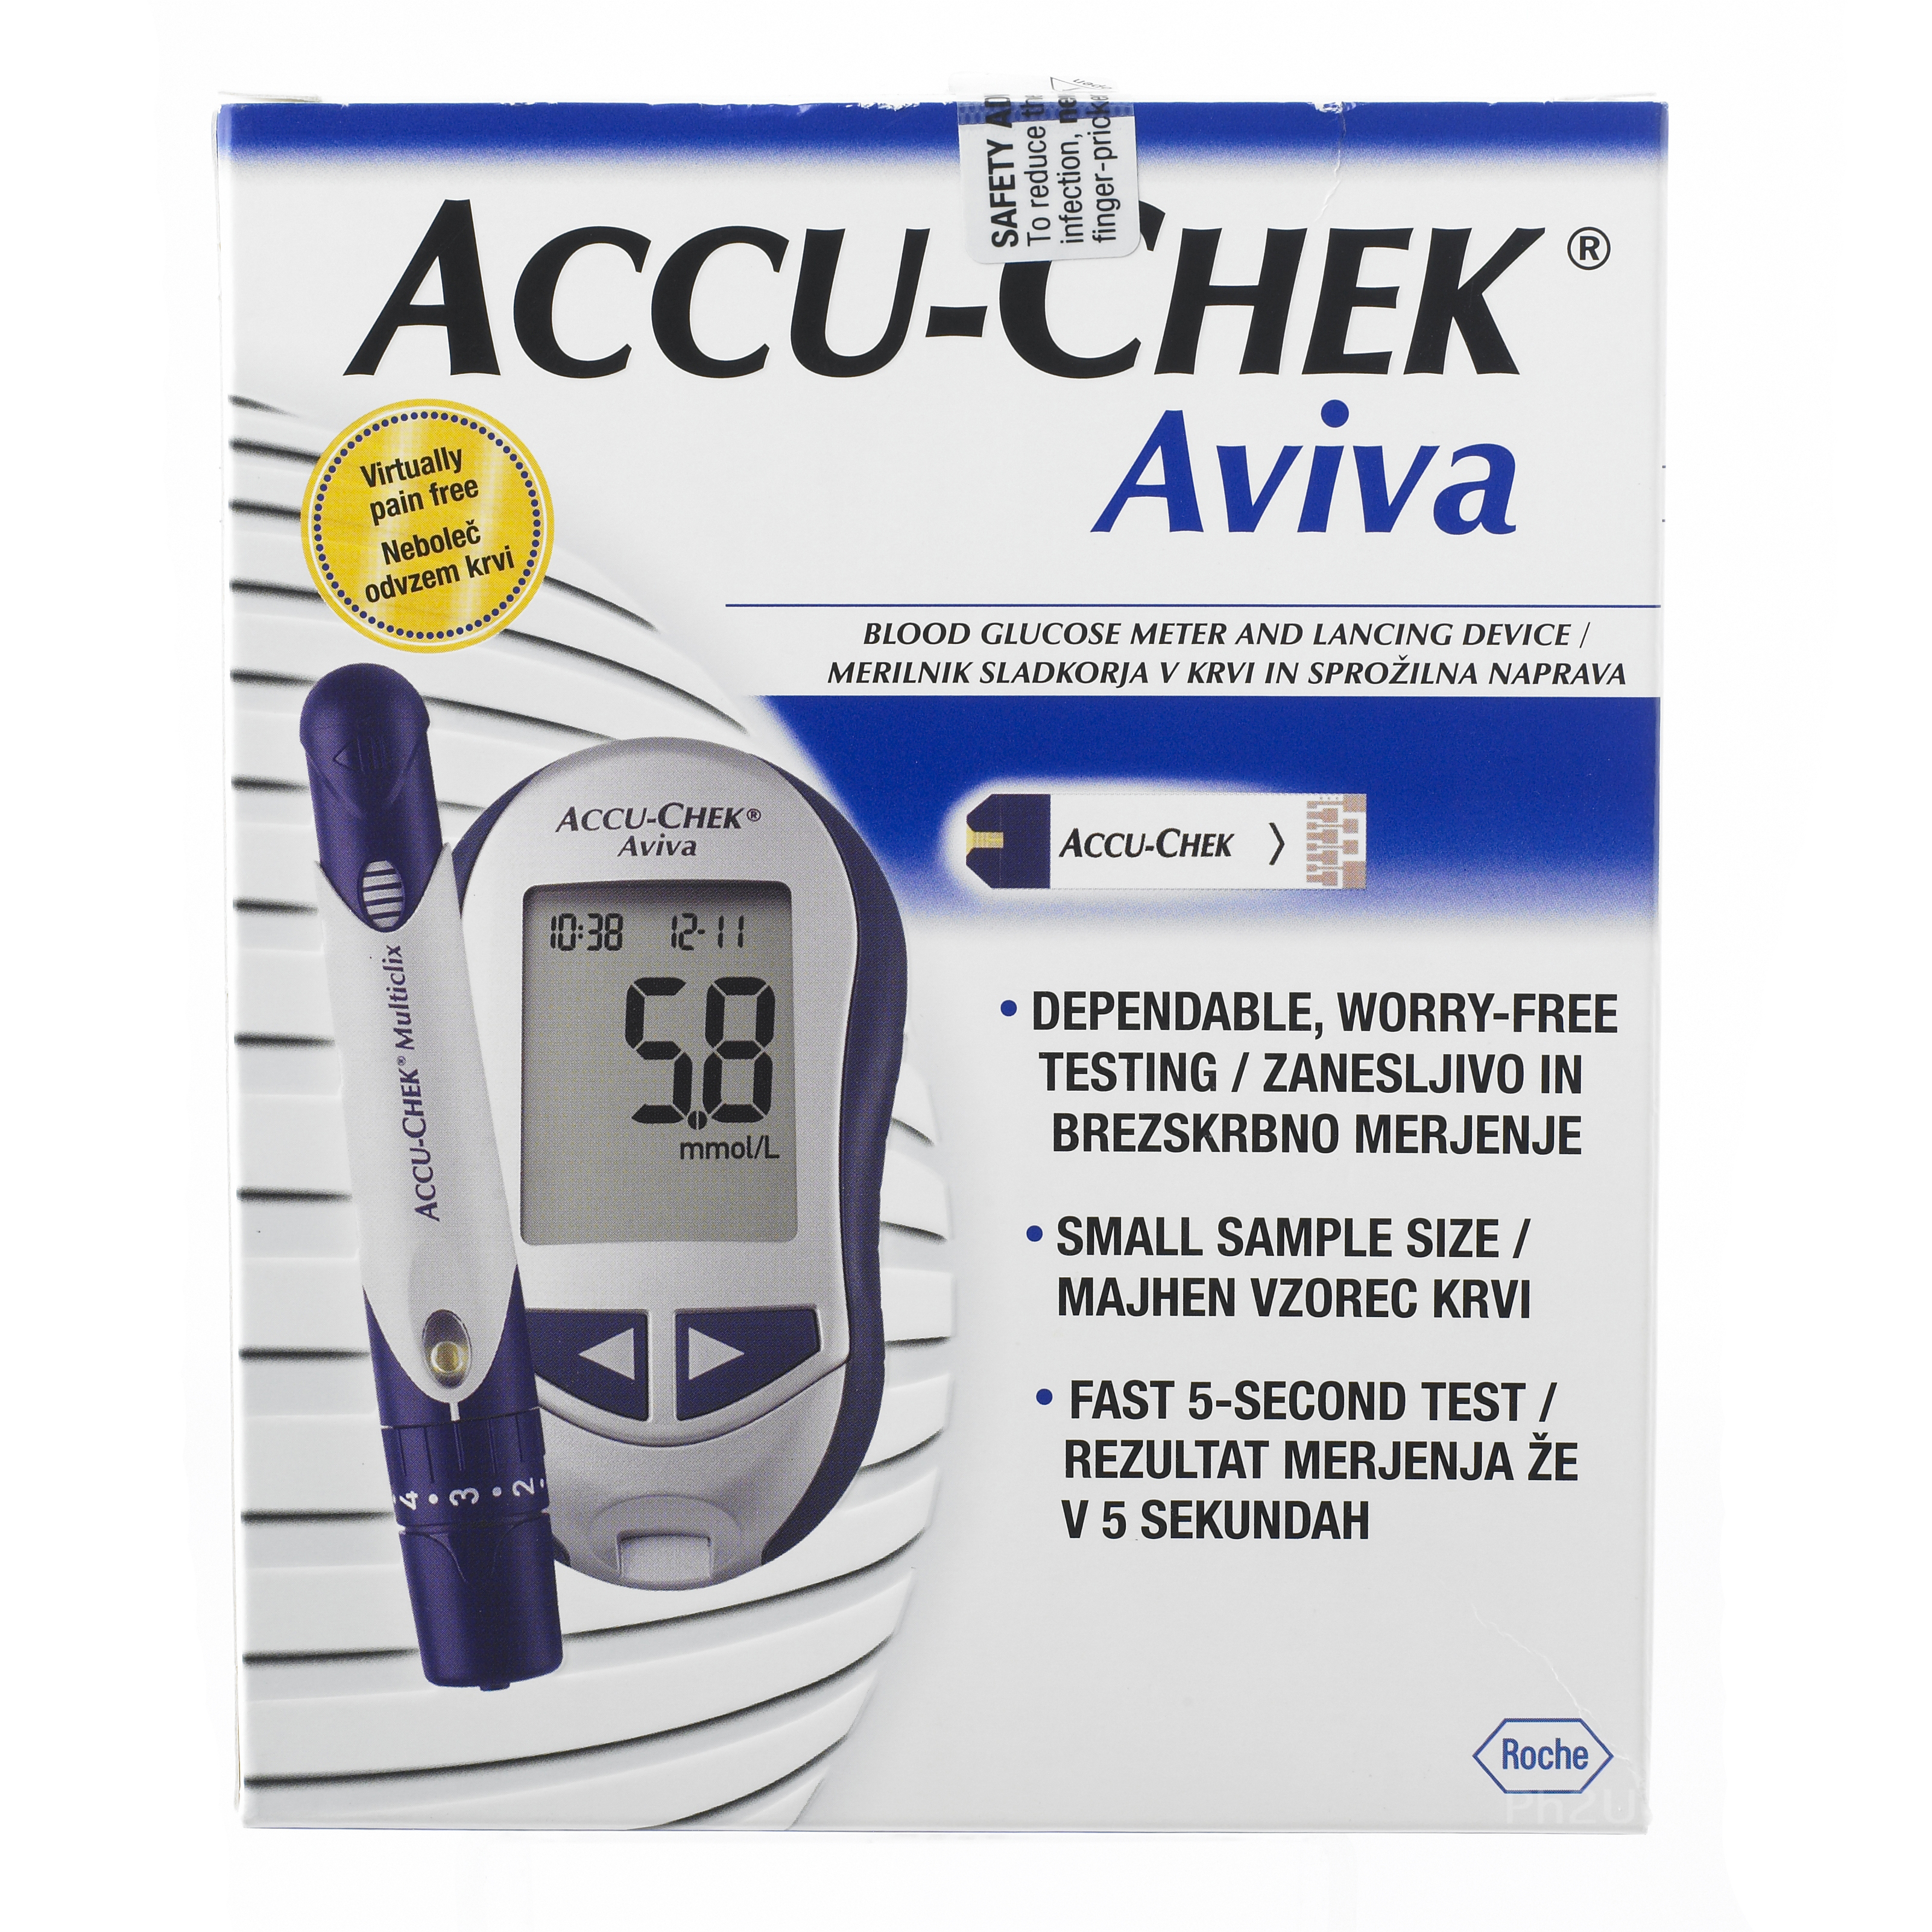 Accu-Chek Aviva Blood Glucose Meter is designed and approved for testing fresh capillary whole blood